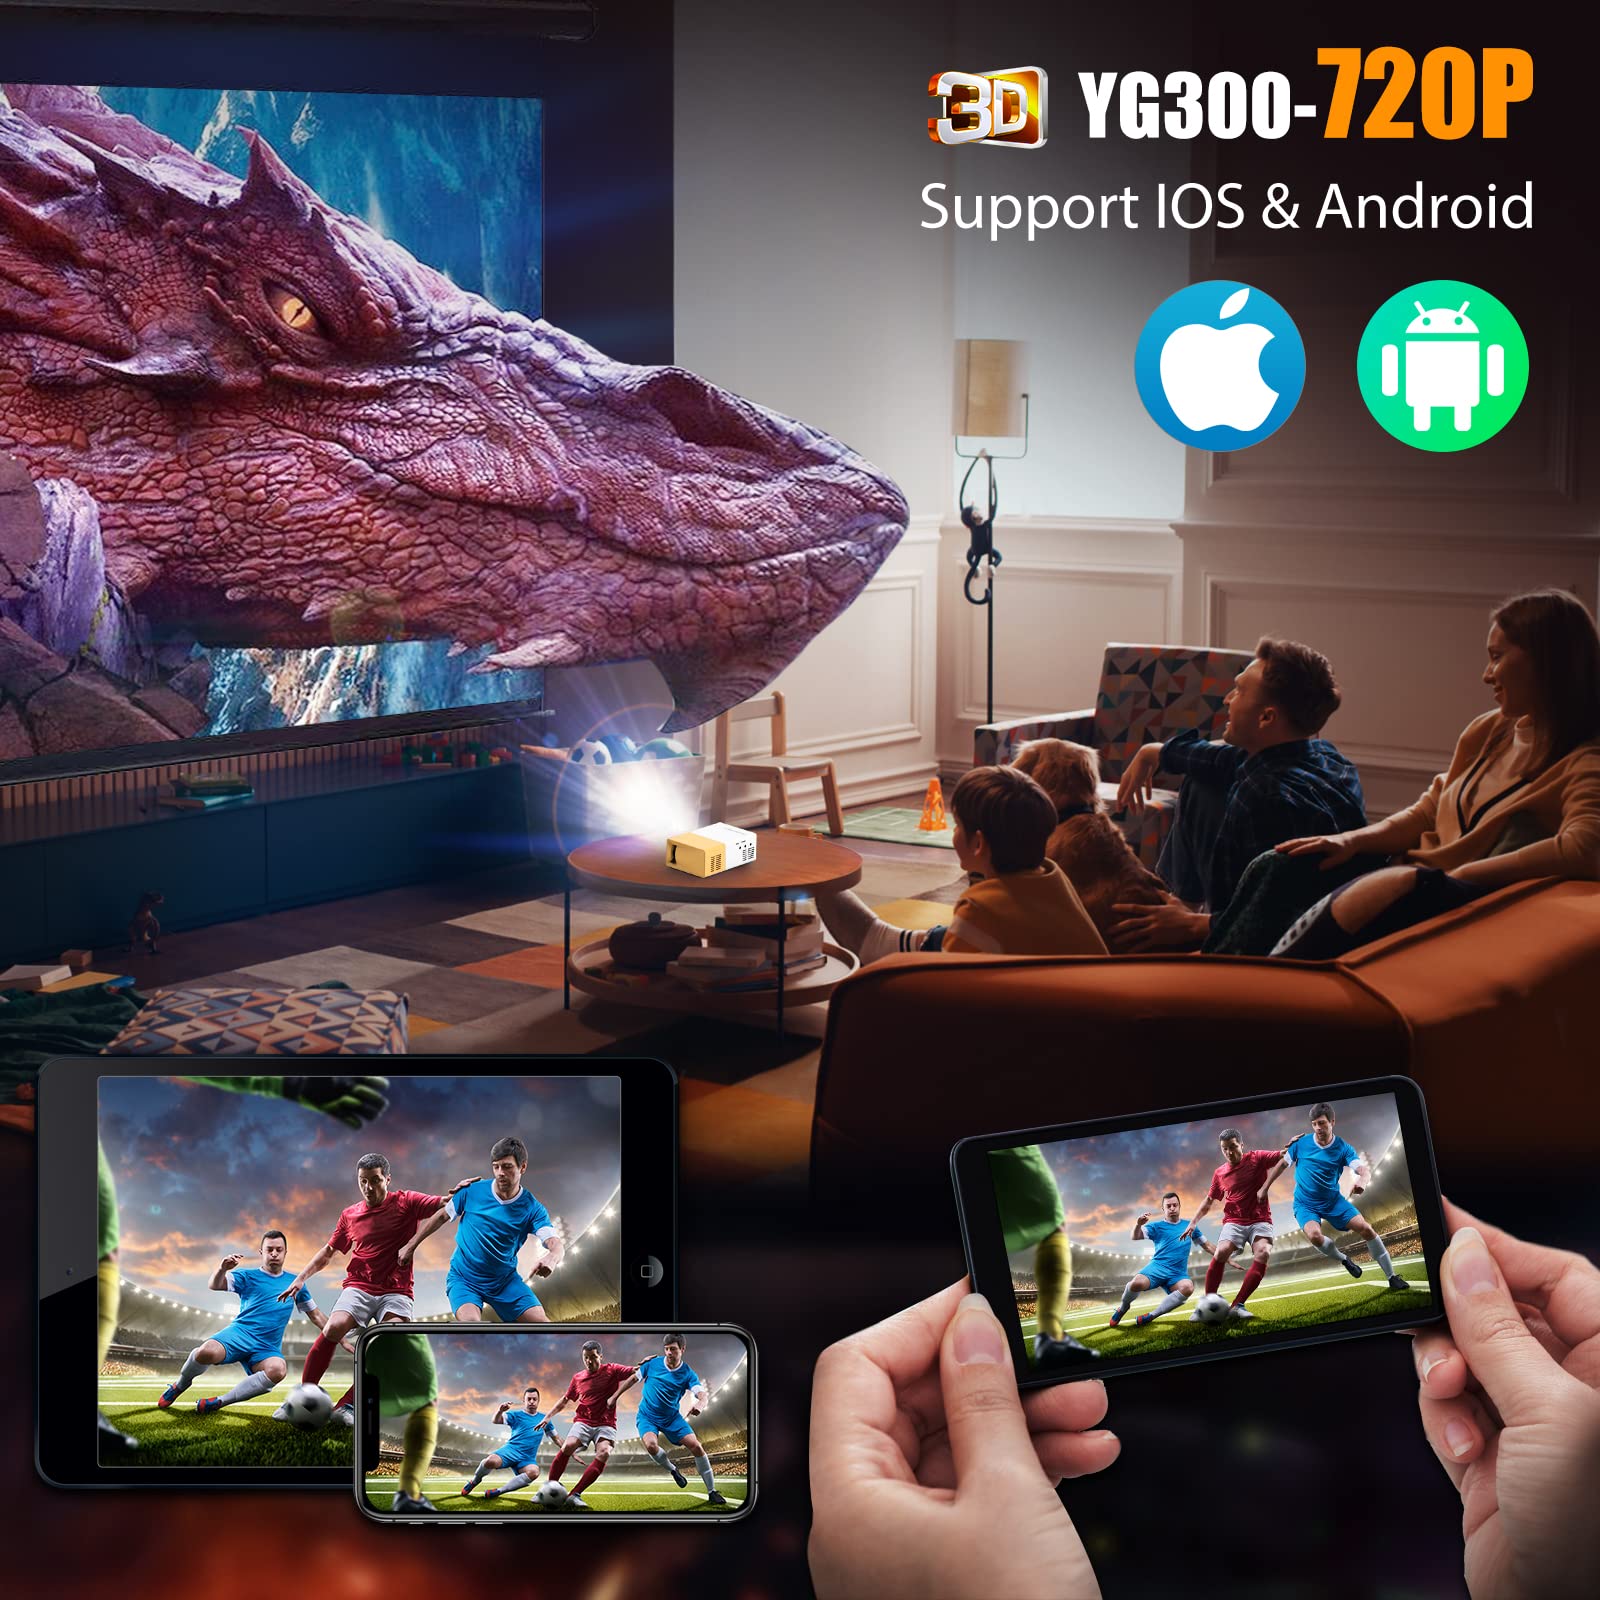 Projector,Meer Mini Projector,Portable Movie Projector,Neat Home Projector,Compatible with iPhone,Android,Windows,Firestick,PS5,Laptop,Tablet,Provide HDMI,USB,Earphone,AV Port and Remote Controller